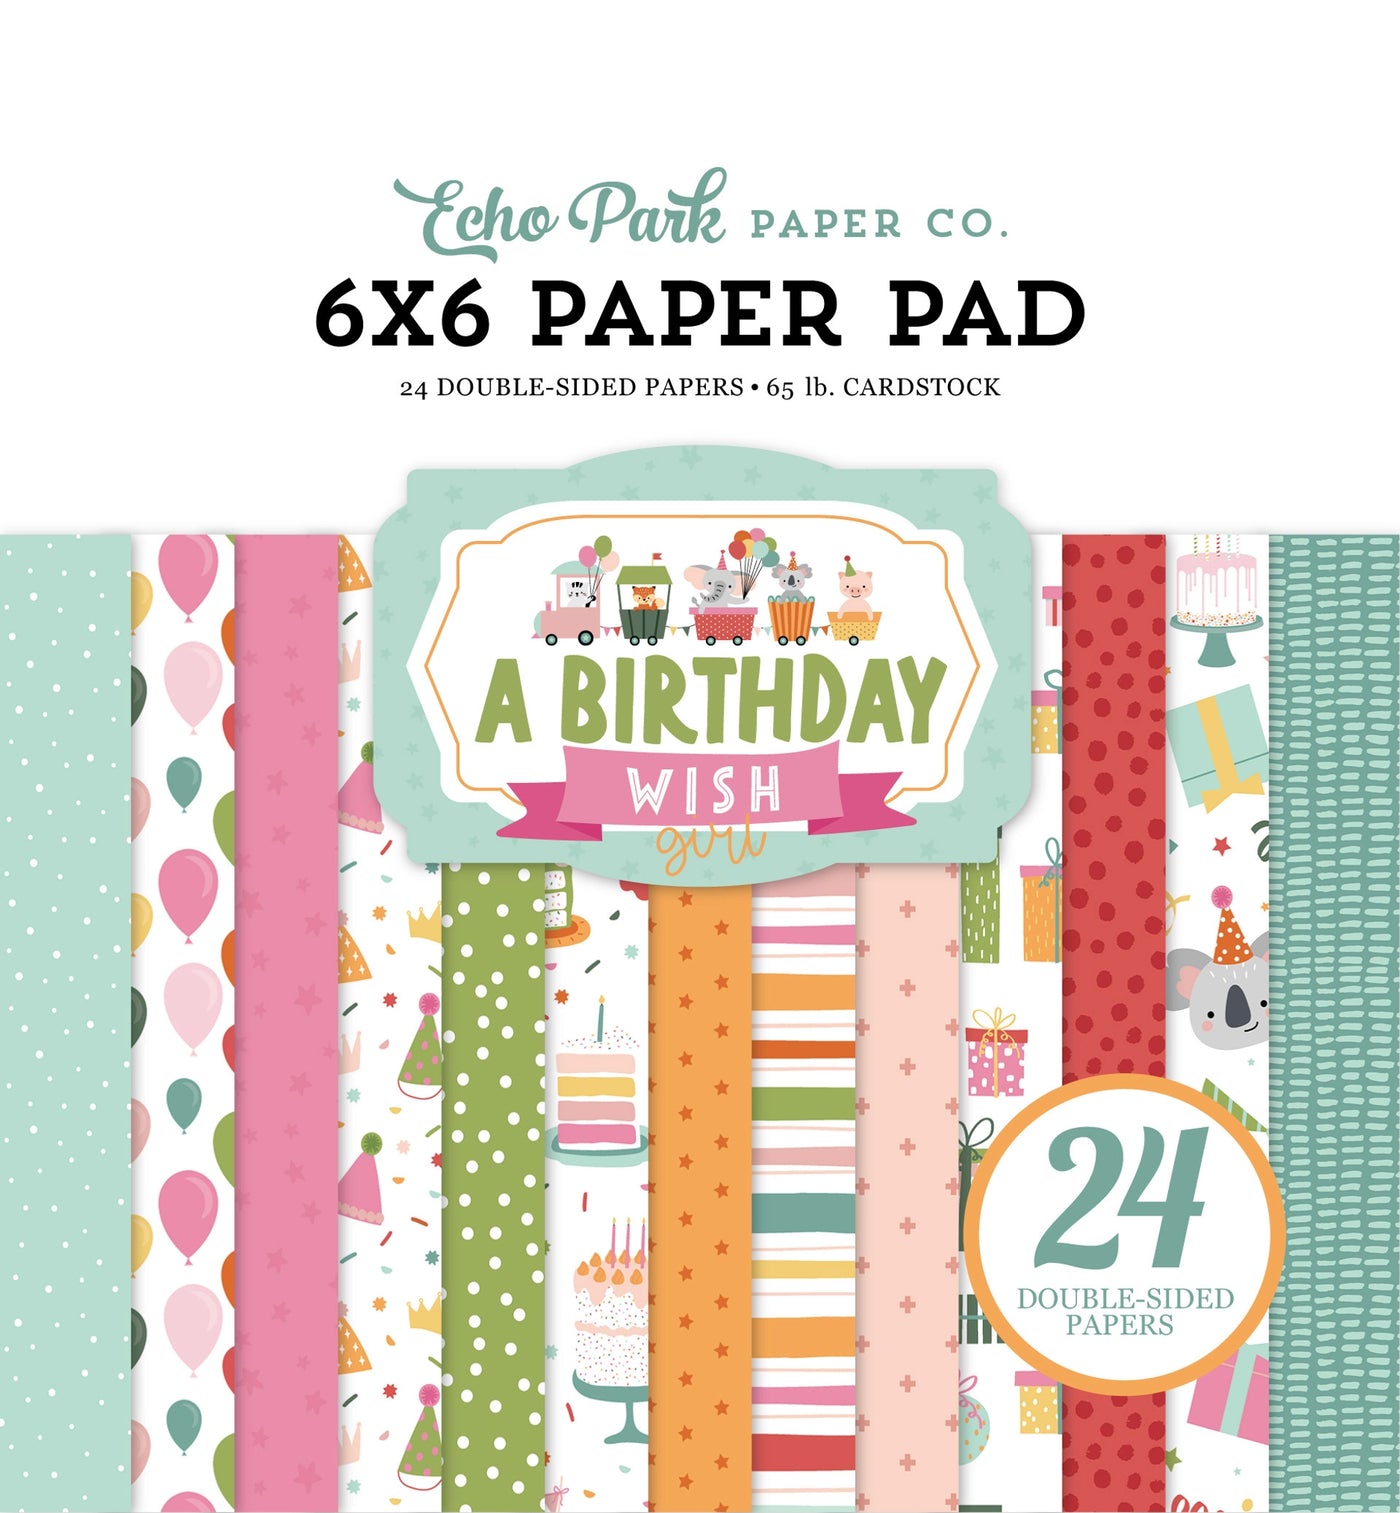 A BIRTHDAY WISH GIRL 6x6 Paper Pad, Echo Park - 6x6 pad with 24 double-sided sheets. Scaled-down images are great for card making and similar crafts. This pad features a brightly colored birthday theme.